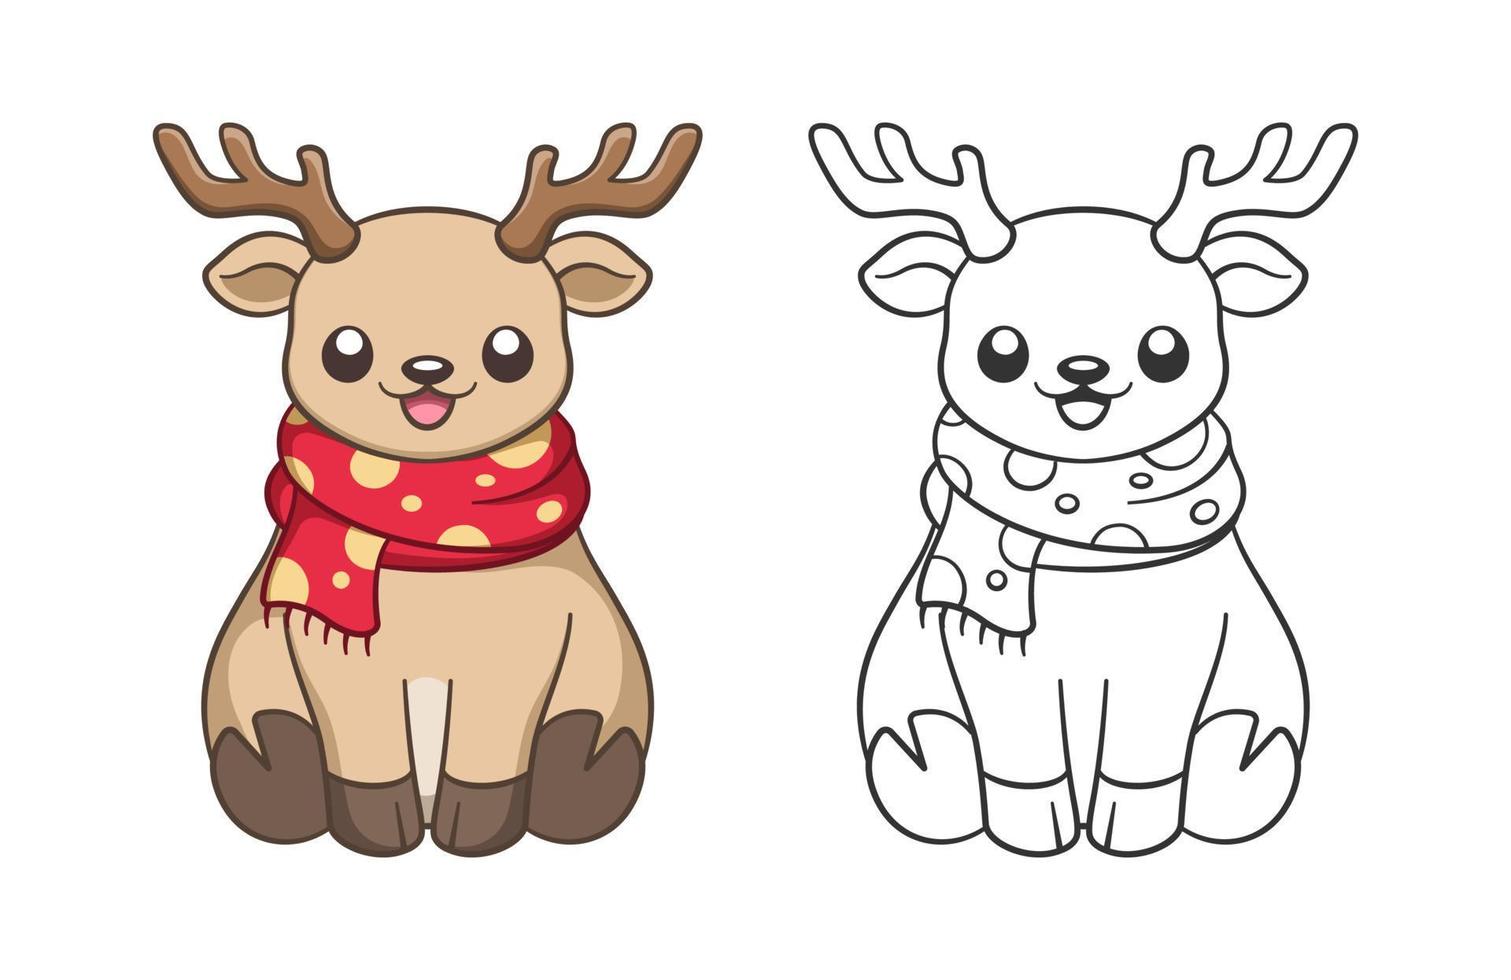 Cute happy reindeer wearing a polka dot scarf outline and colored doodle animal cartoon illustration set. Winter wildlife Christmas theme coloring book page activity for kids and adults. vector